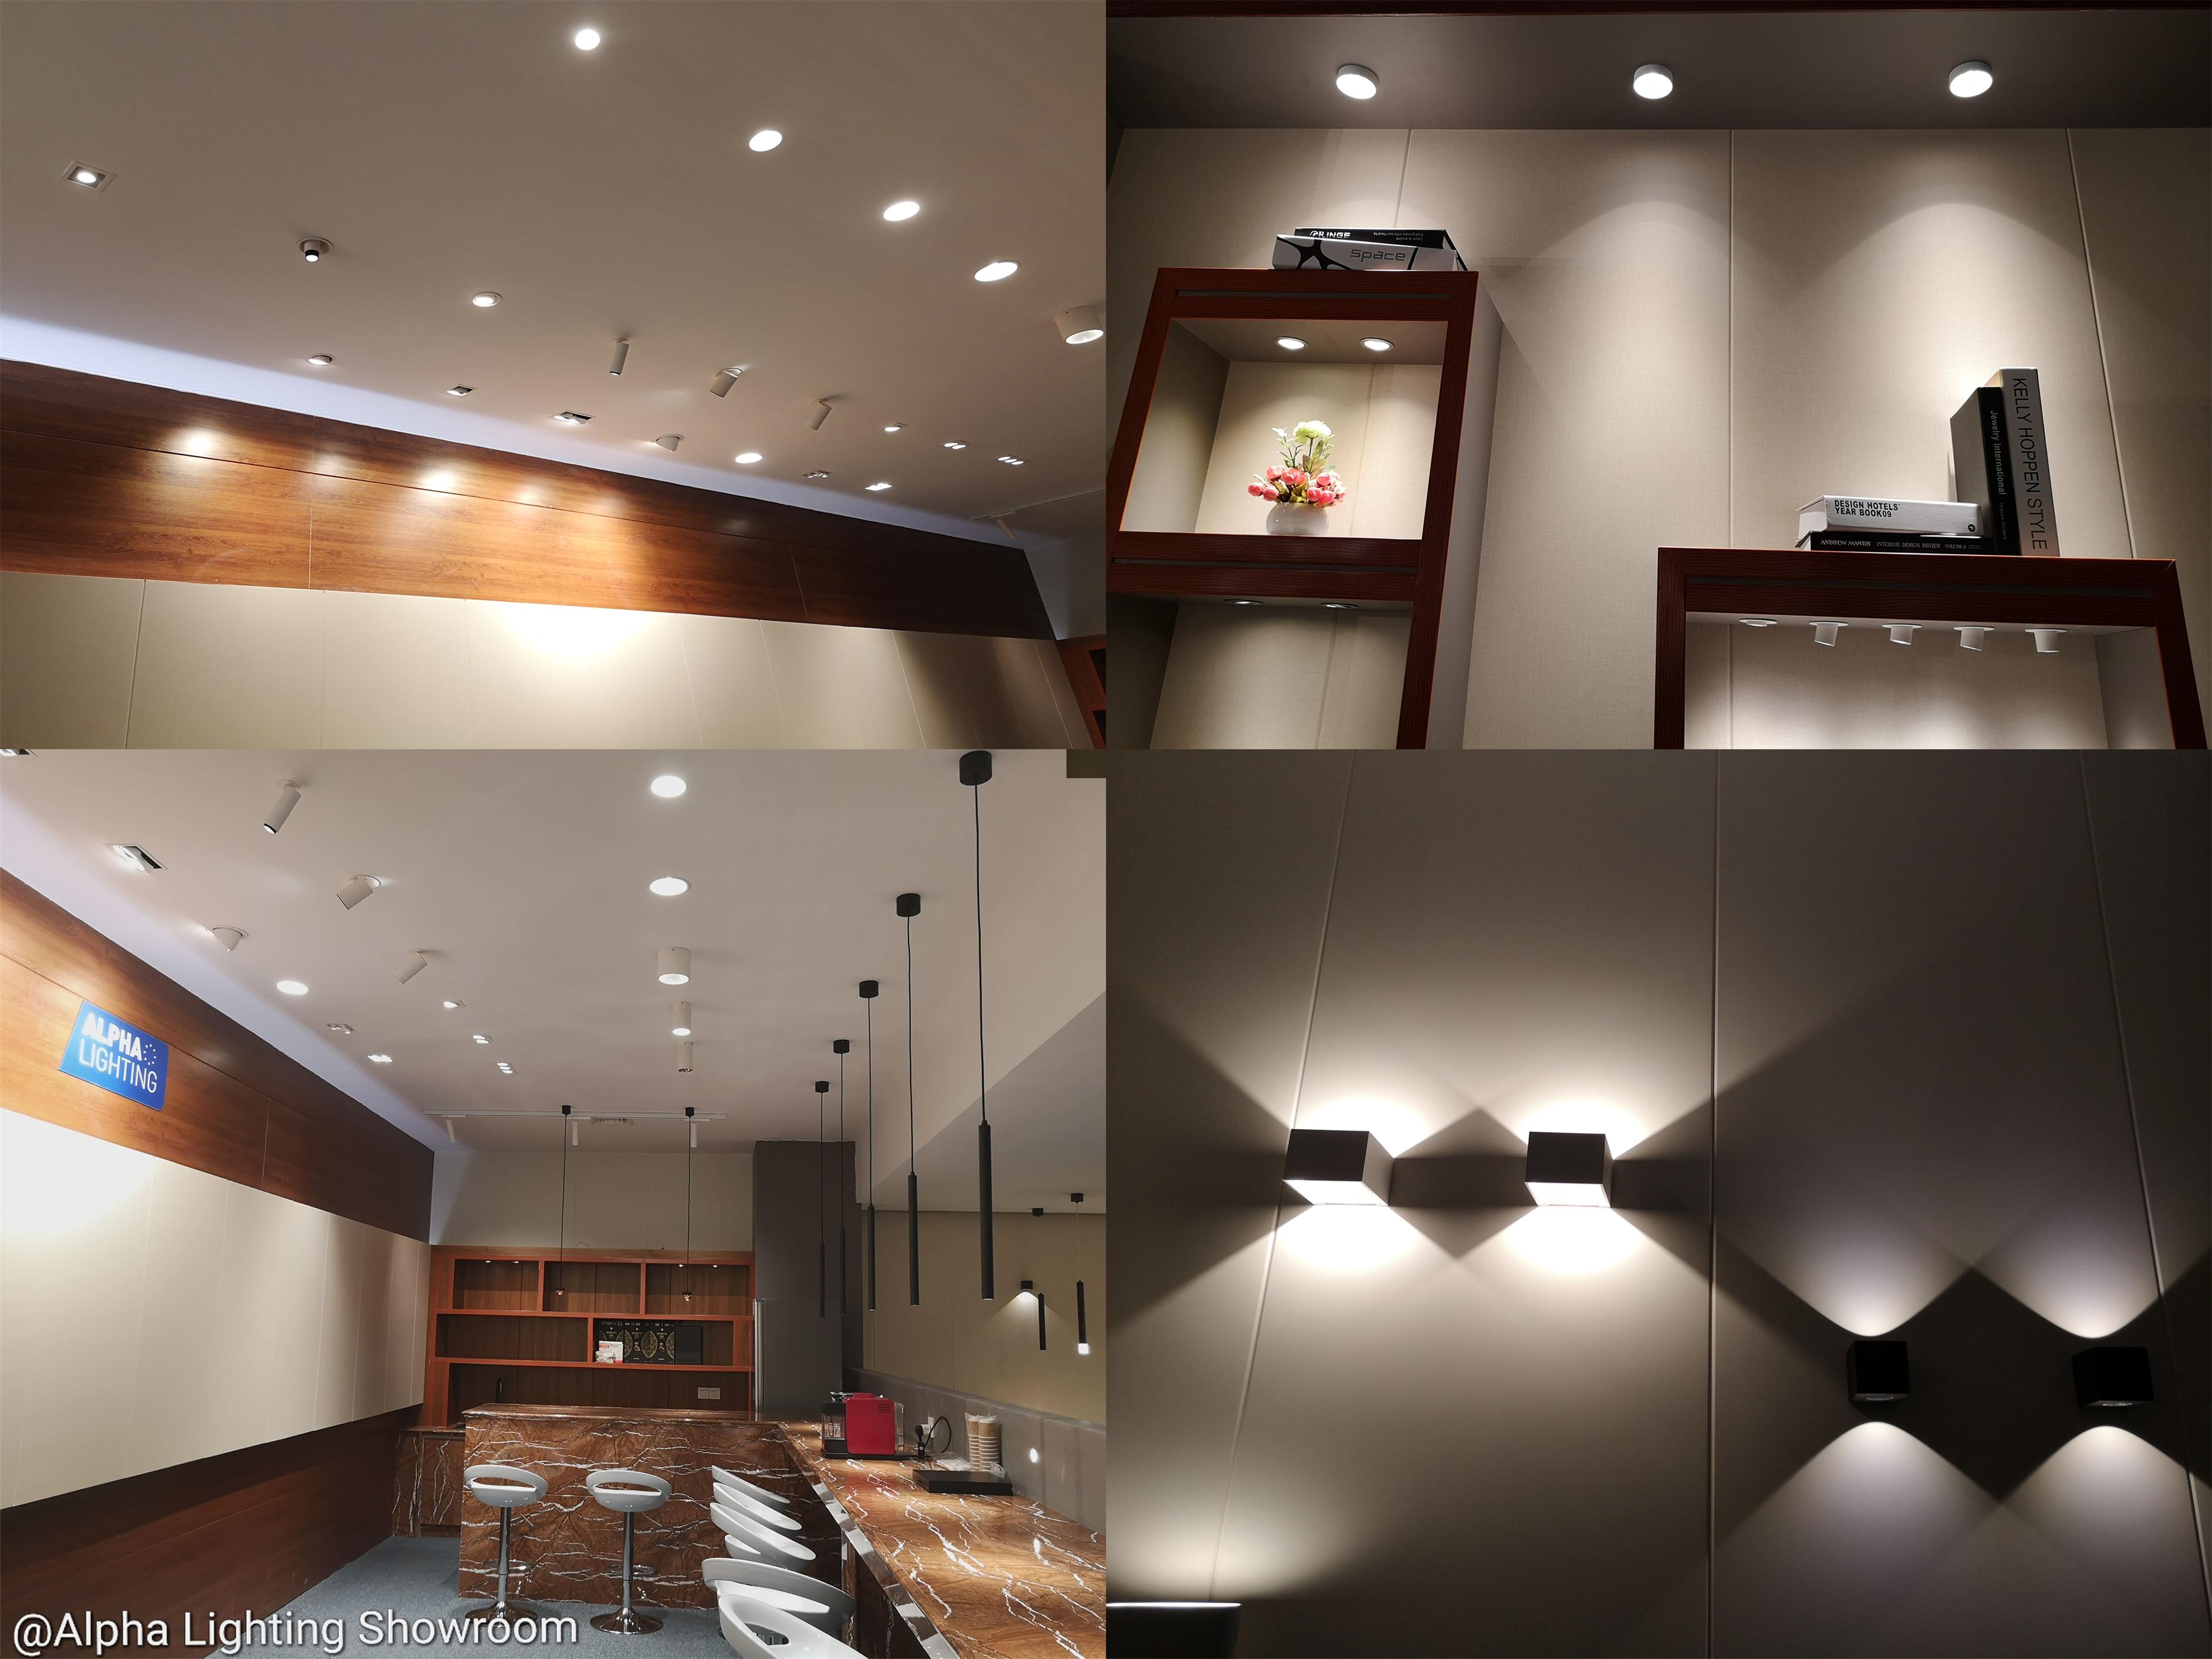 What’s function of Auxiliary Lights for modern house?